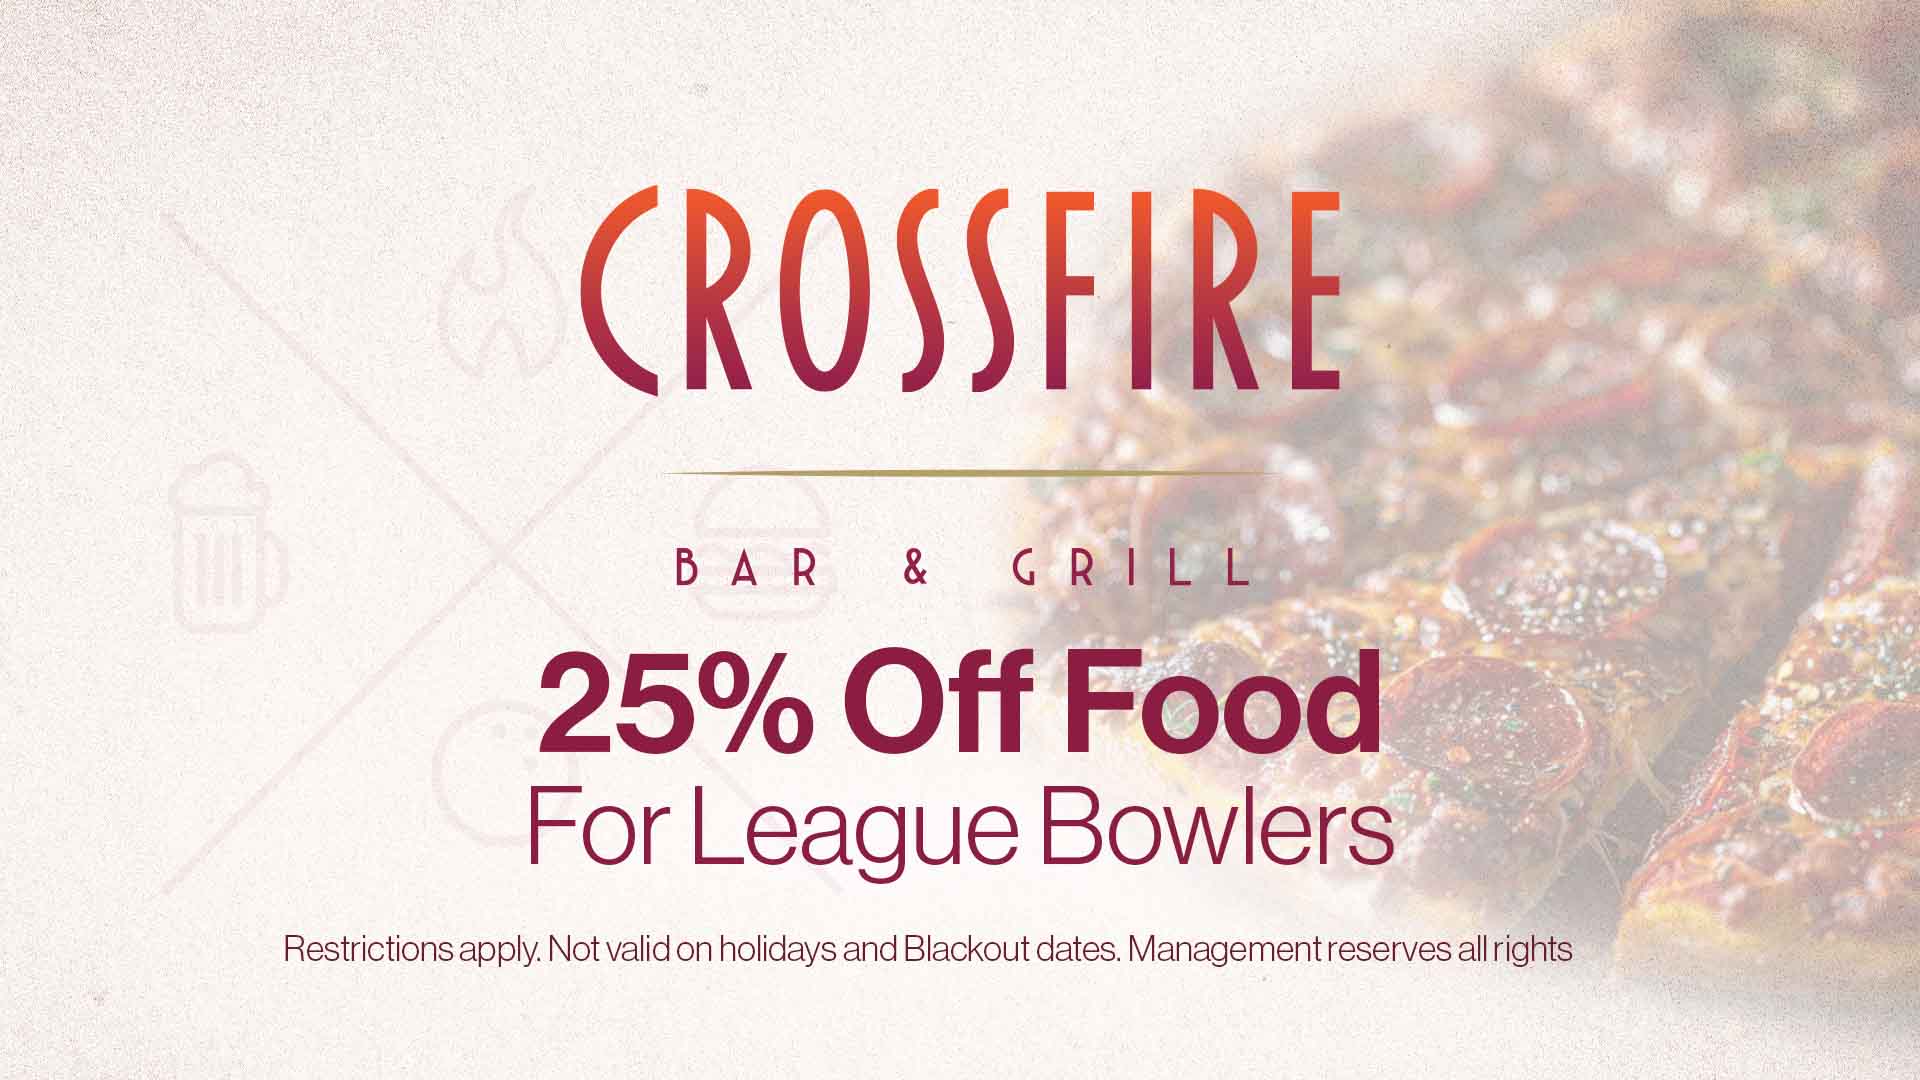 25% Off food for league bowlers at Crossfire Bar & Grill